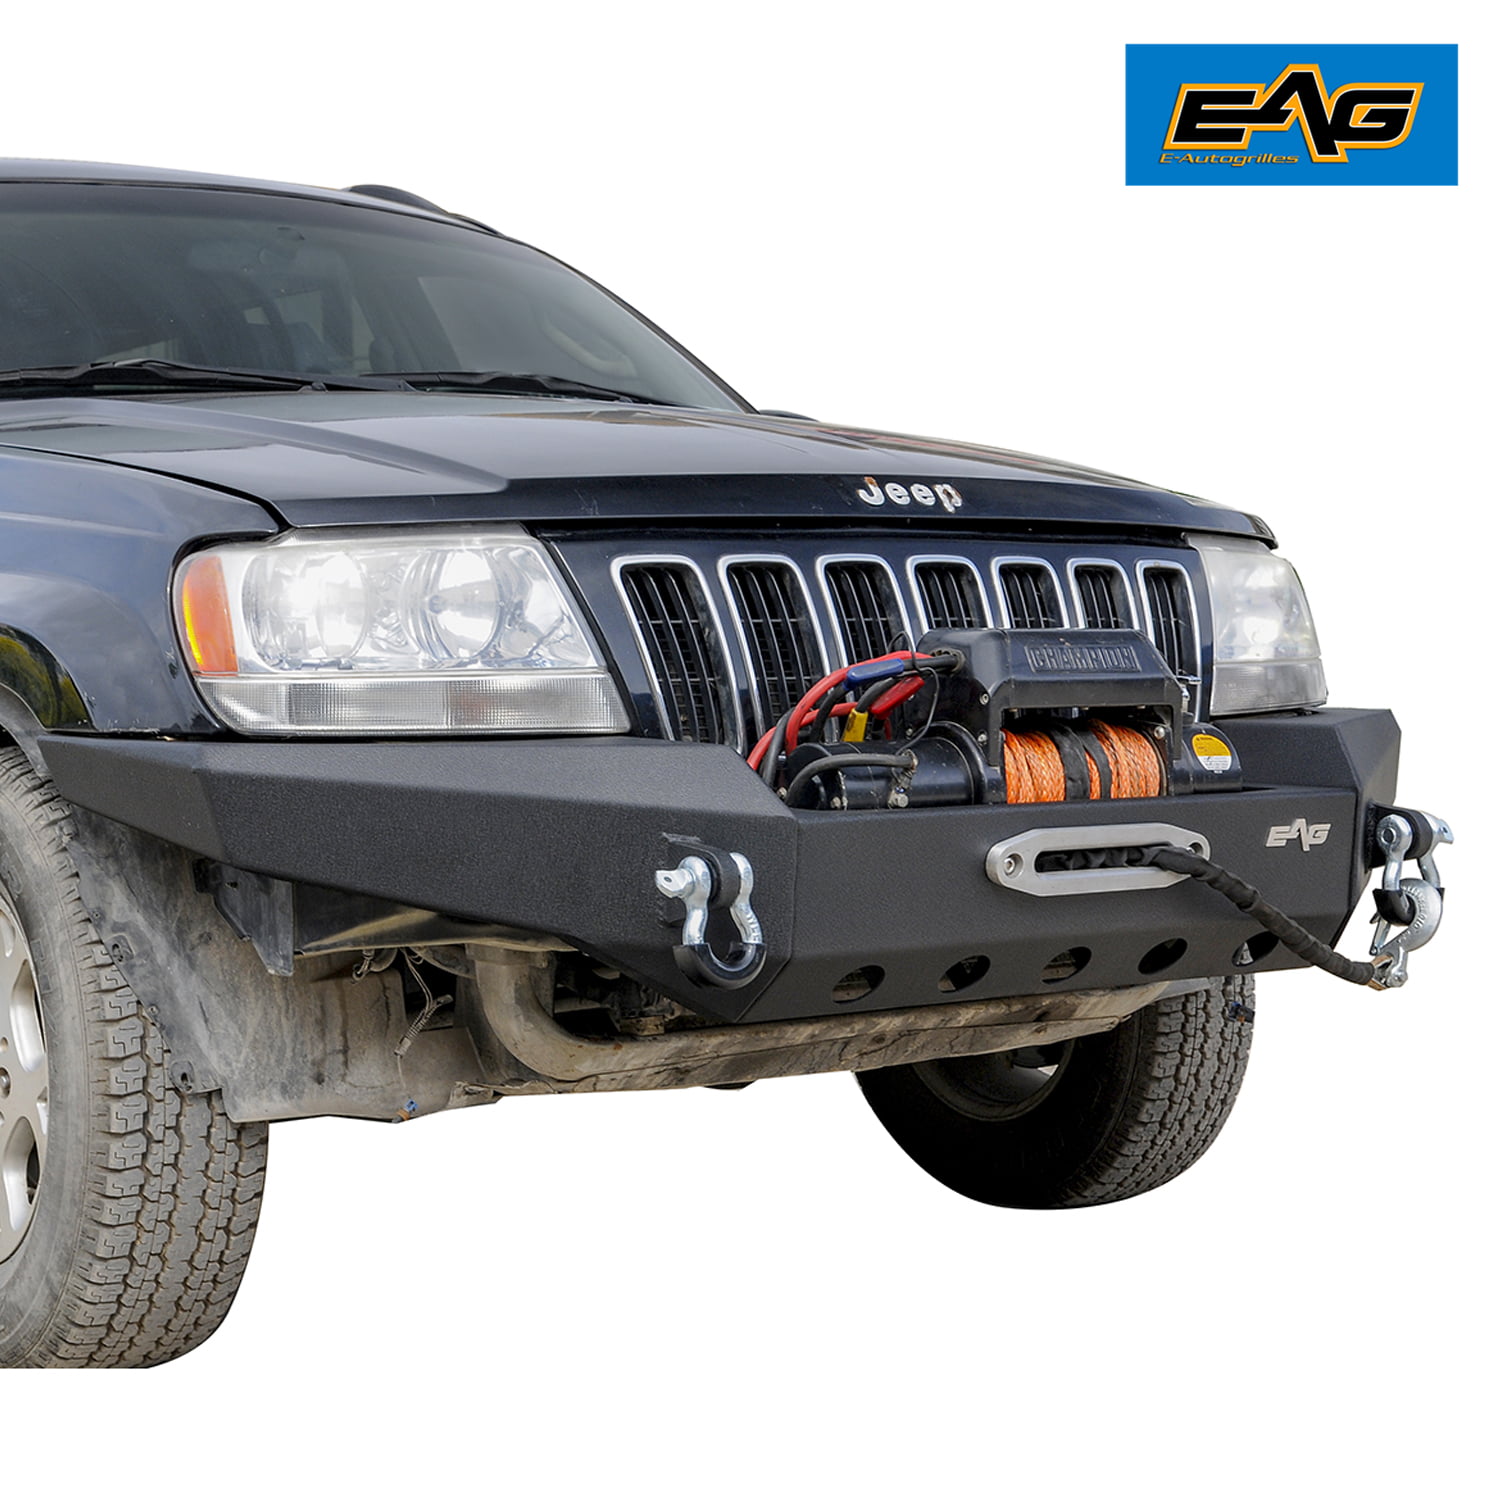 eag-assembled-front-bumper-compatible-with-1999-2004-grand-cherokee-wj